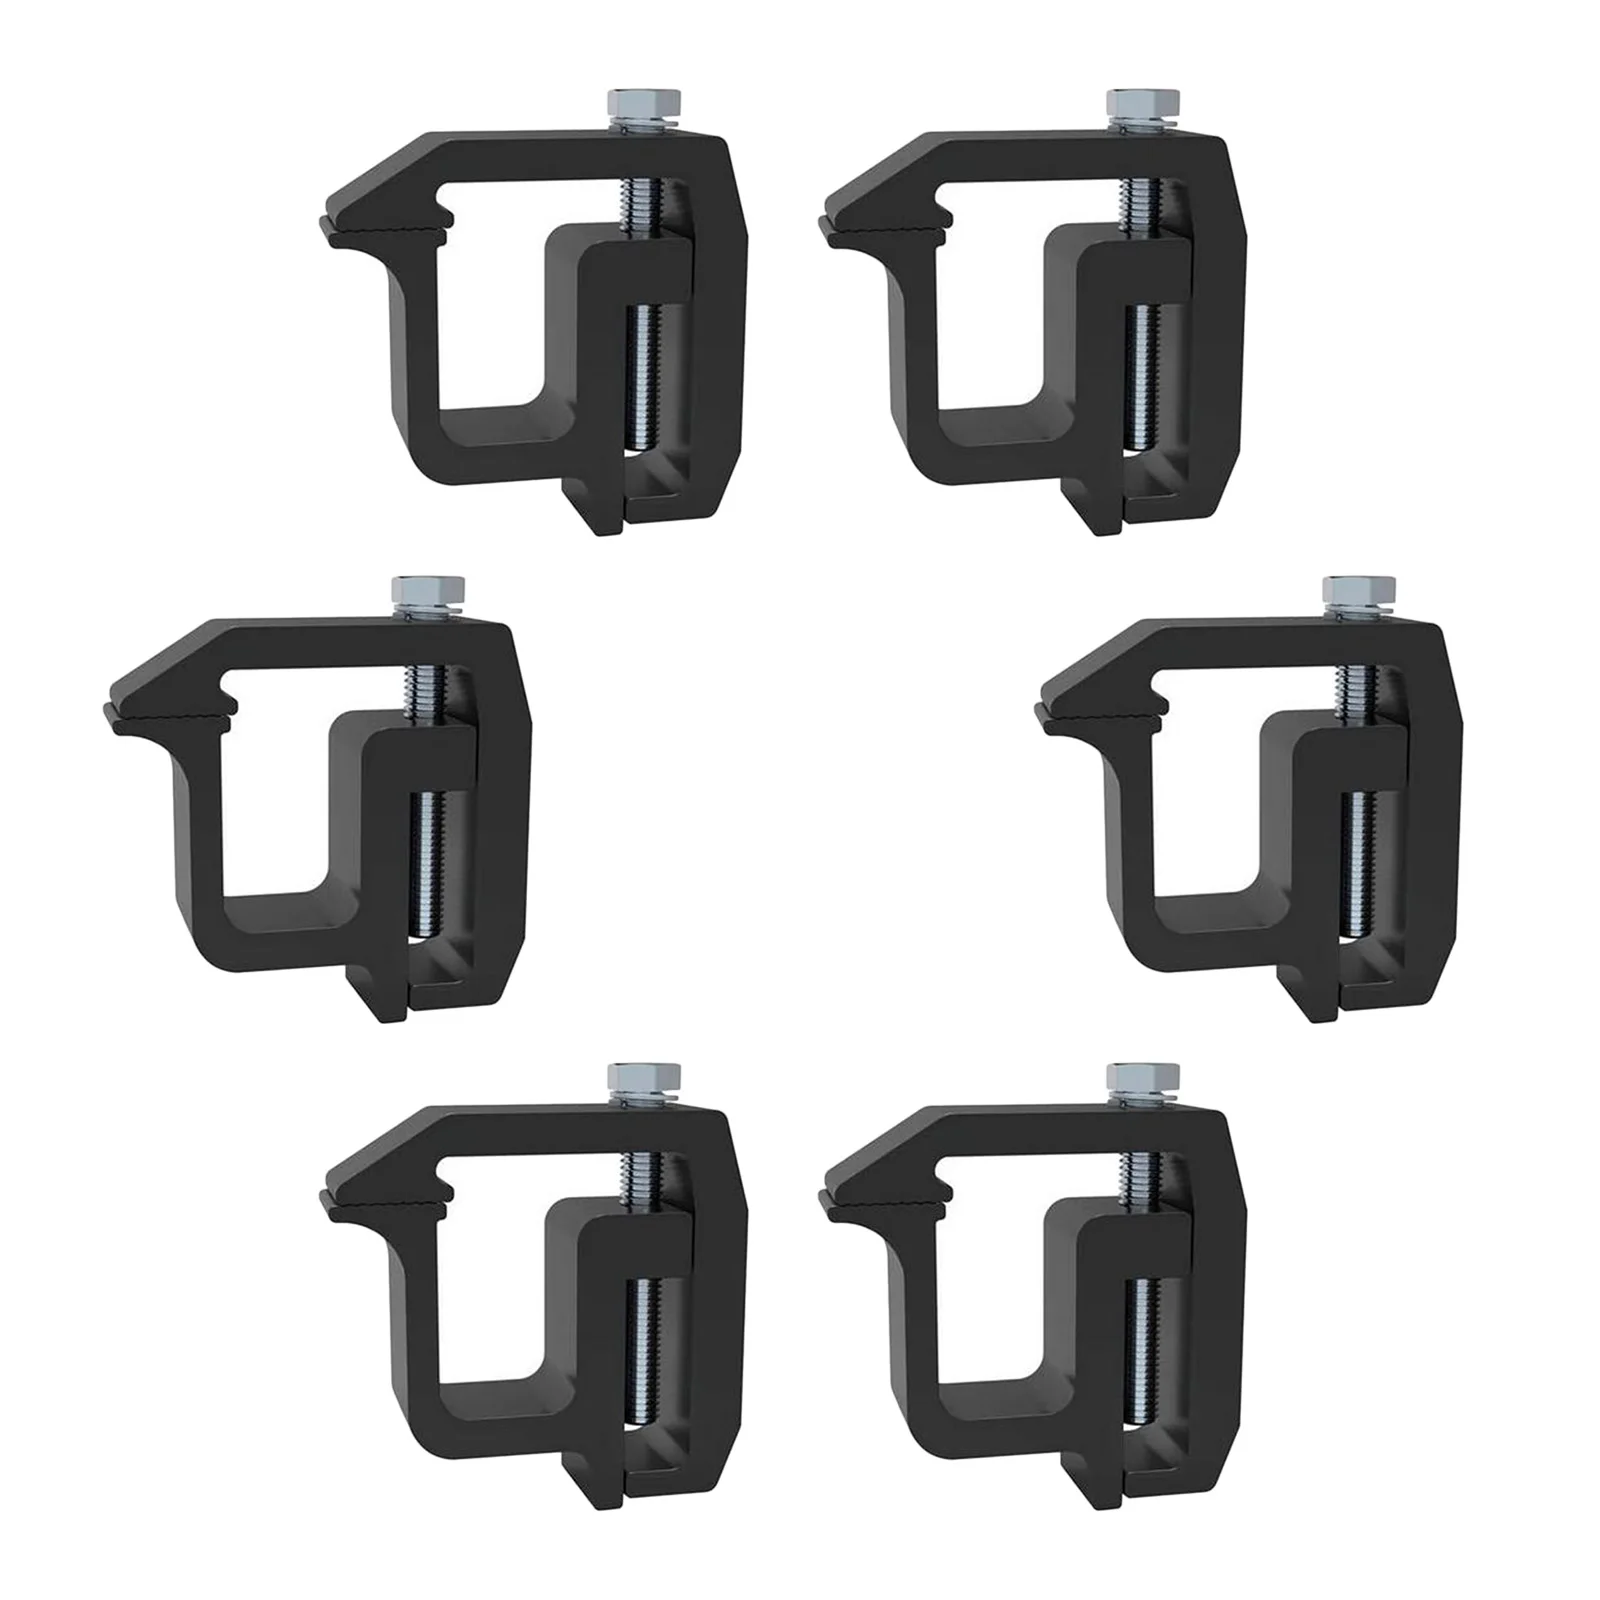 Mounting Clamps Truck Caps Camper Shell for Chevy Sierra 1500 2500 3500 and More Pick-up Truck Models Truck Bed Parts Black